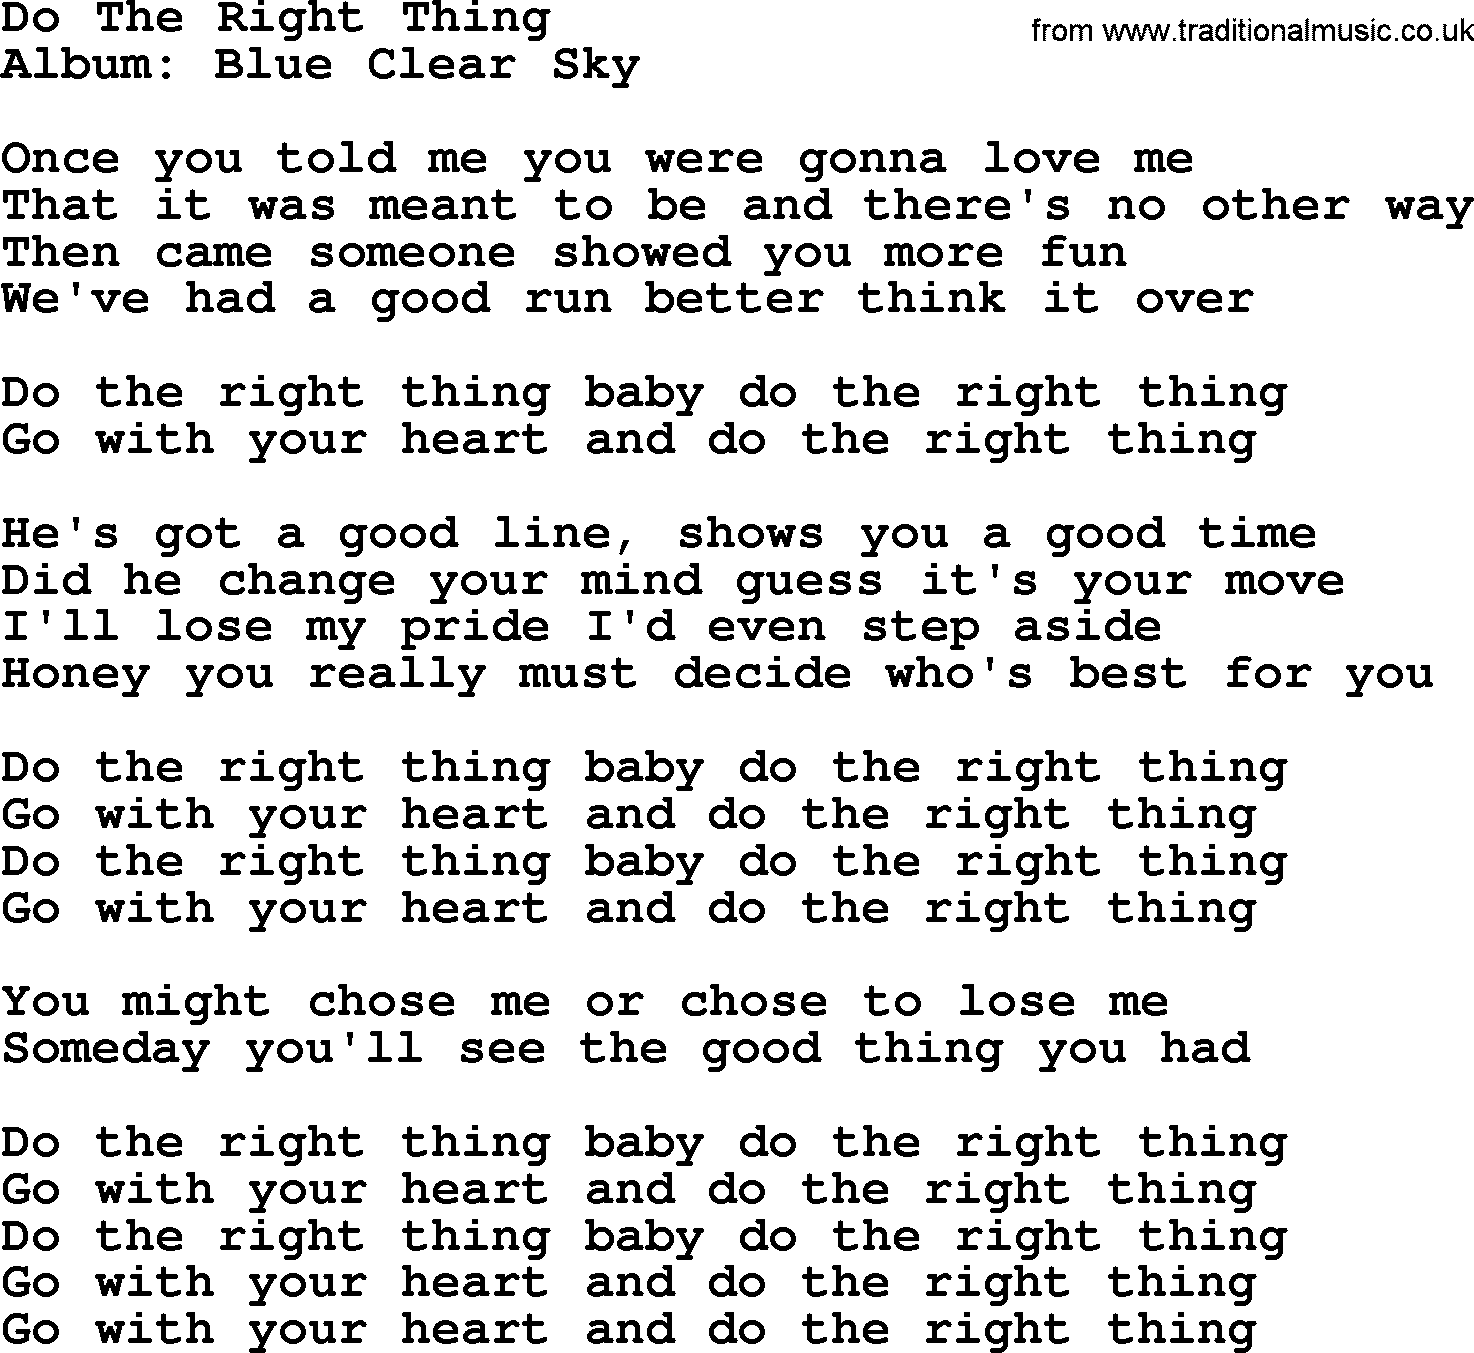 George Strait song: Do The Right Thing, lyrics